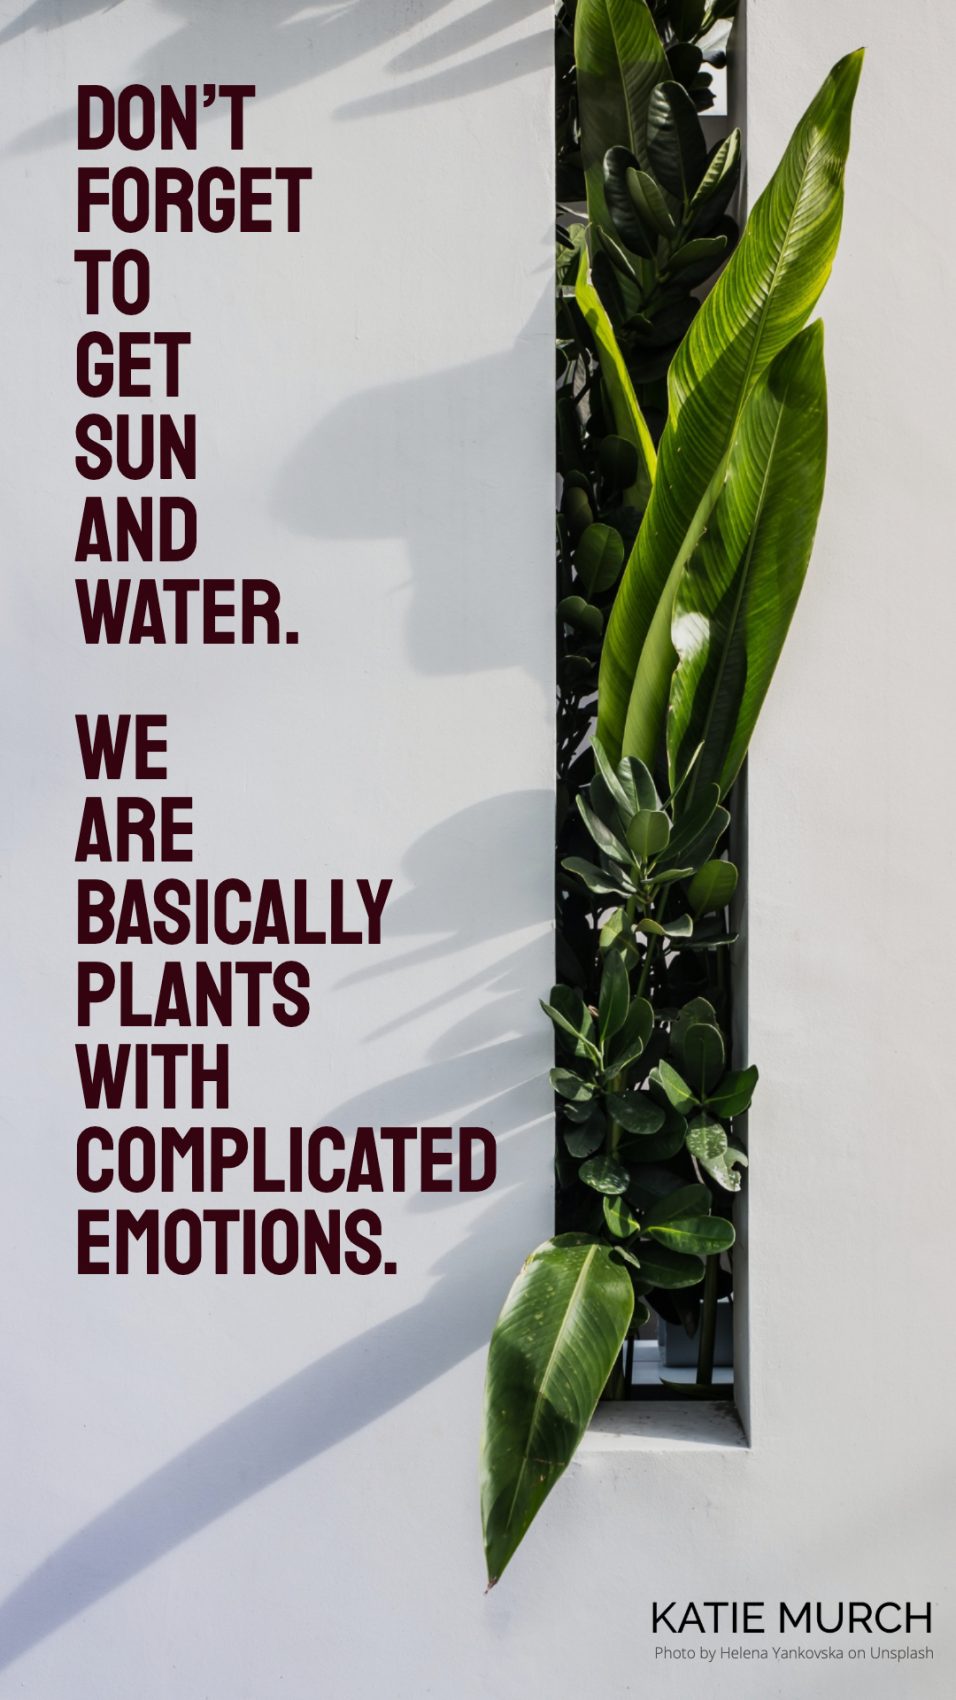 Quote is on a white background and framed with a box garden of succulents on the right. Katie Murch and photo credit is on the bottom right of the image.